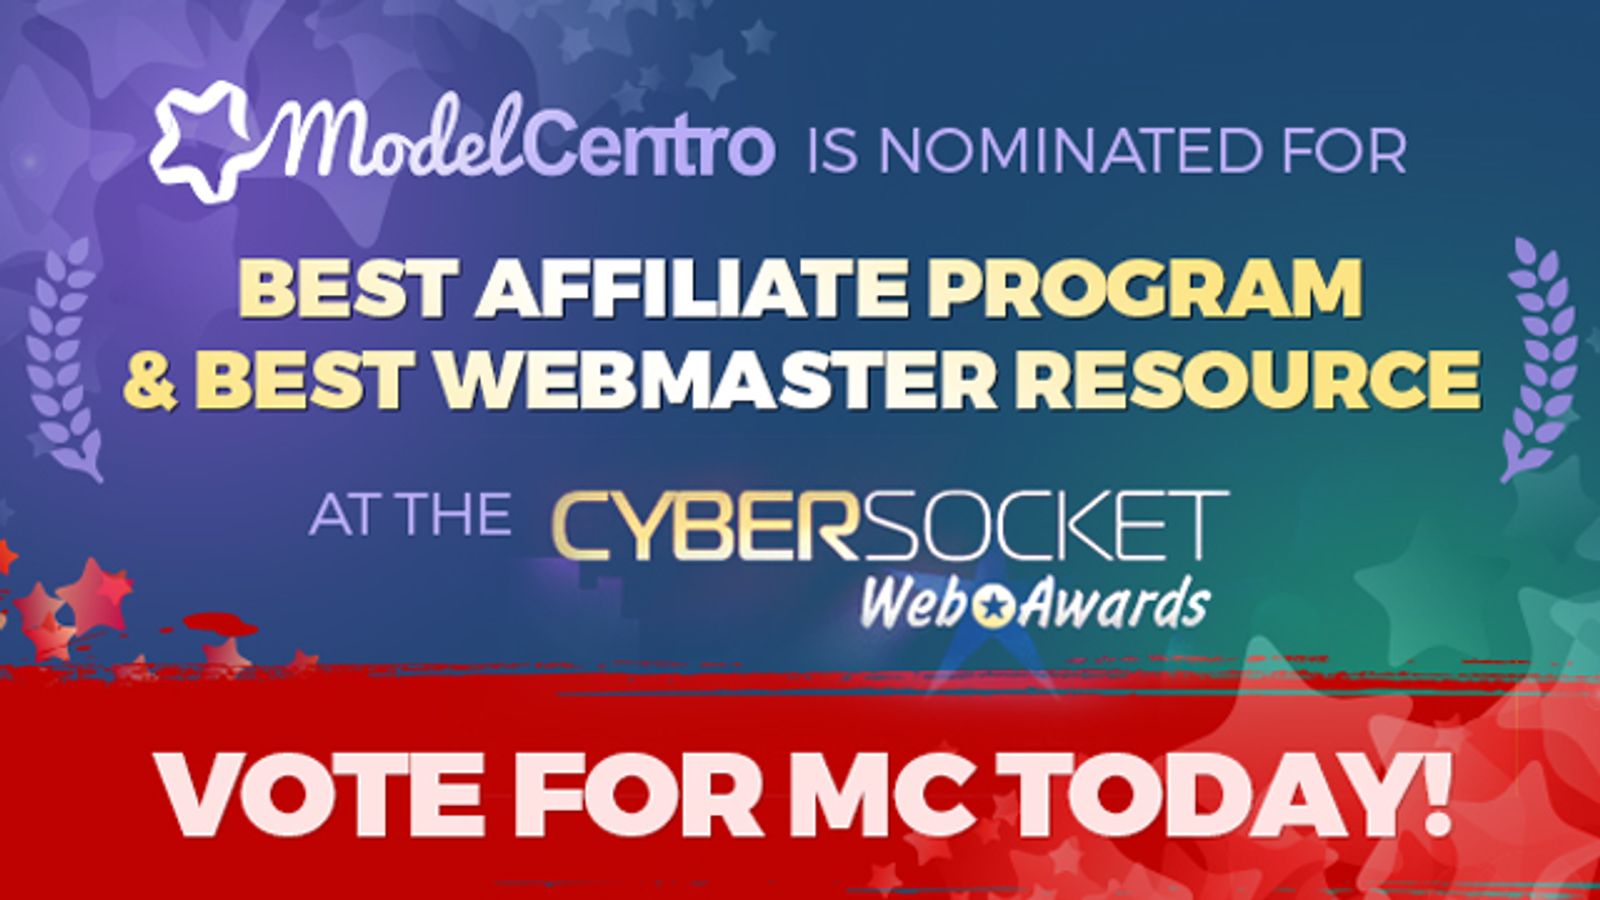 ModelCentro Receives Multiple Cybersocket Award Nominations